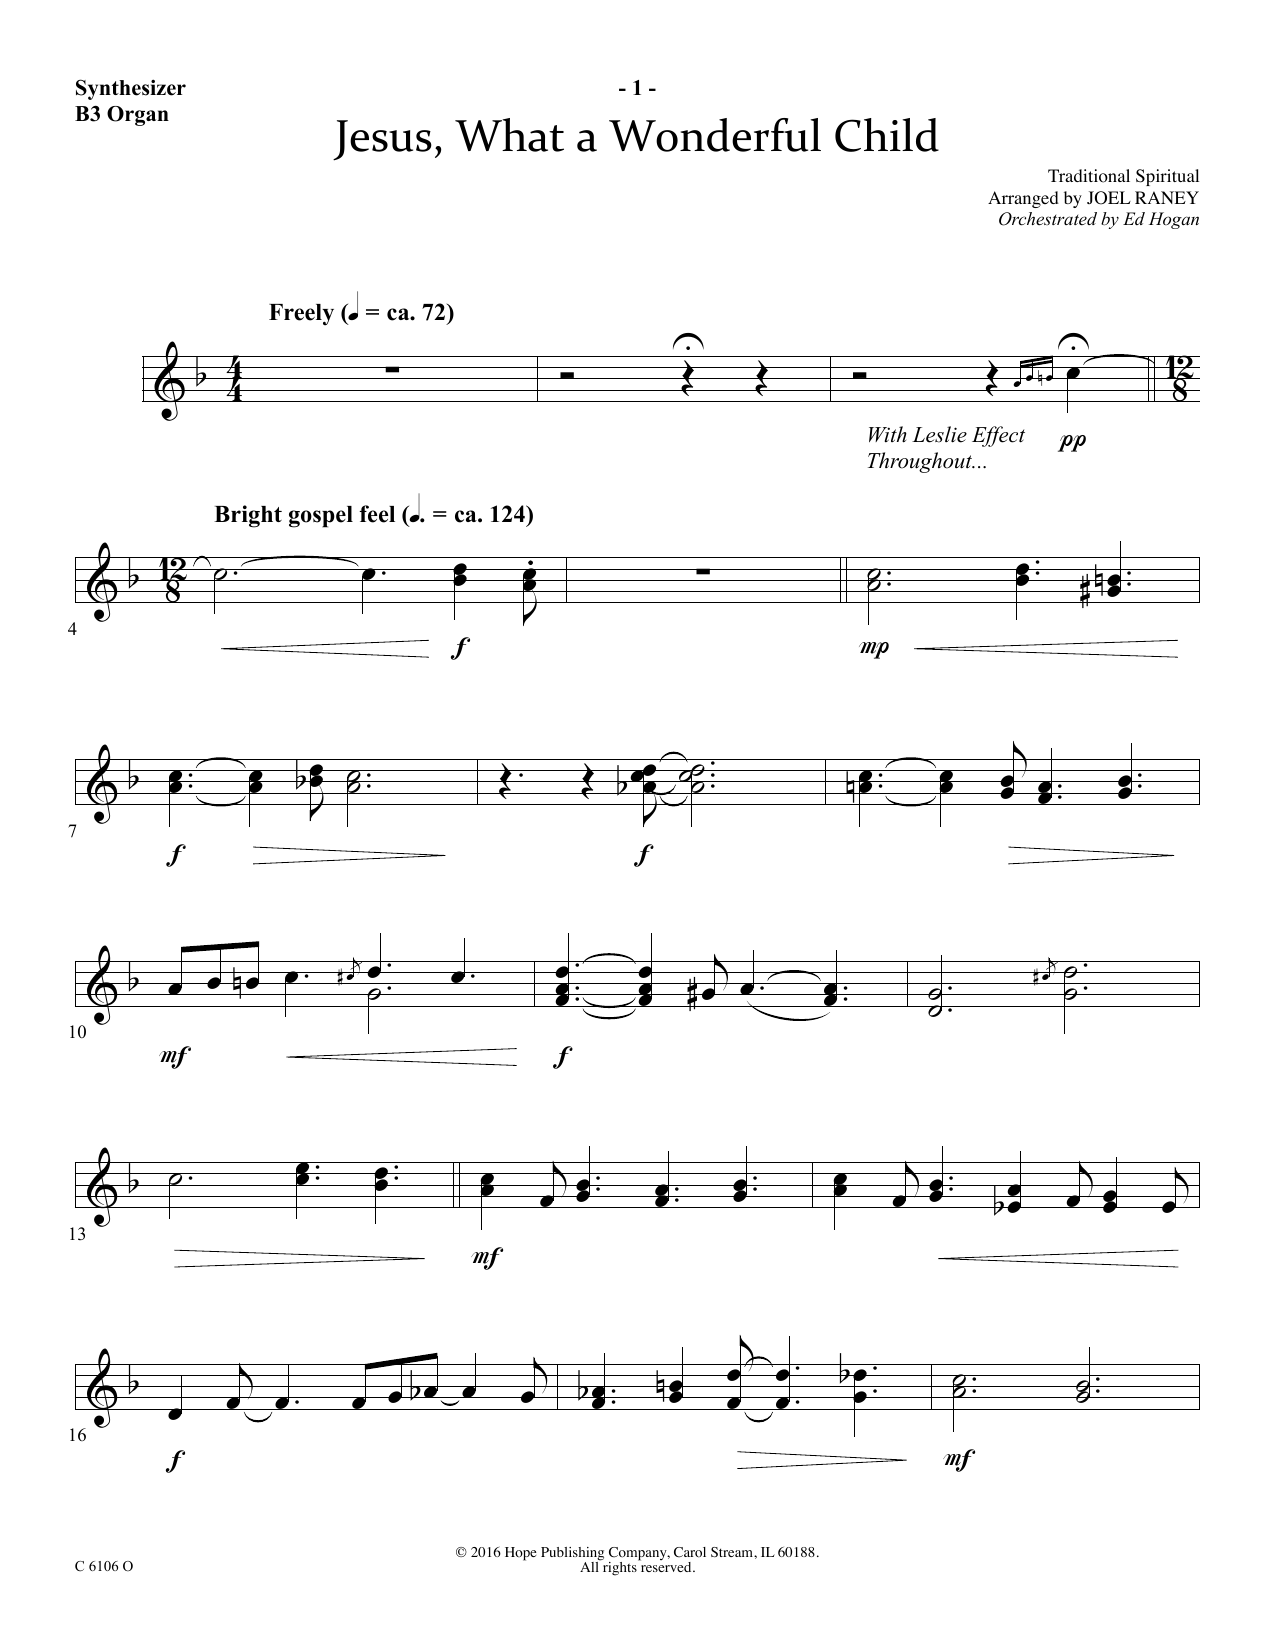 Download Joel Raney Jesus, What a Wonderful Child - Synthes Sheet Music